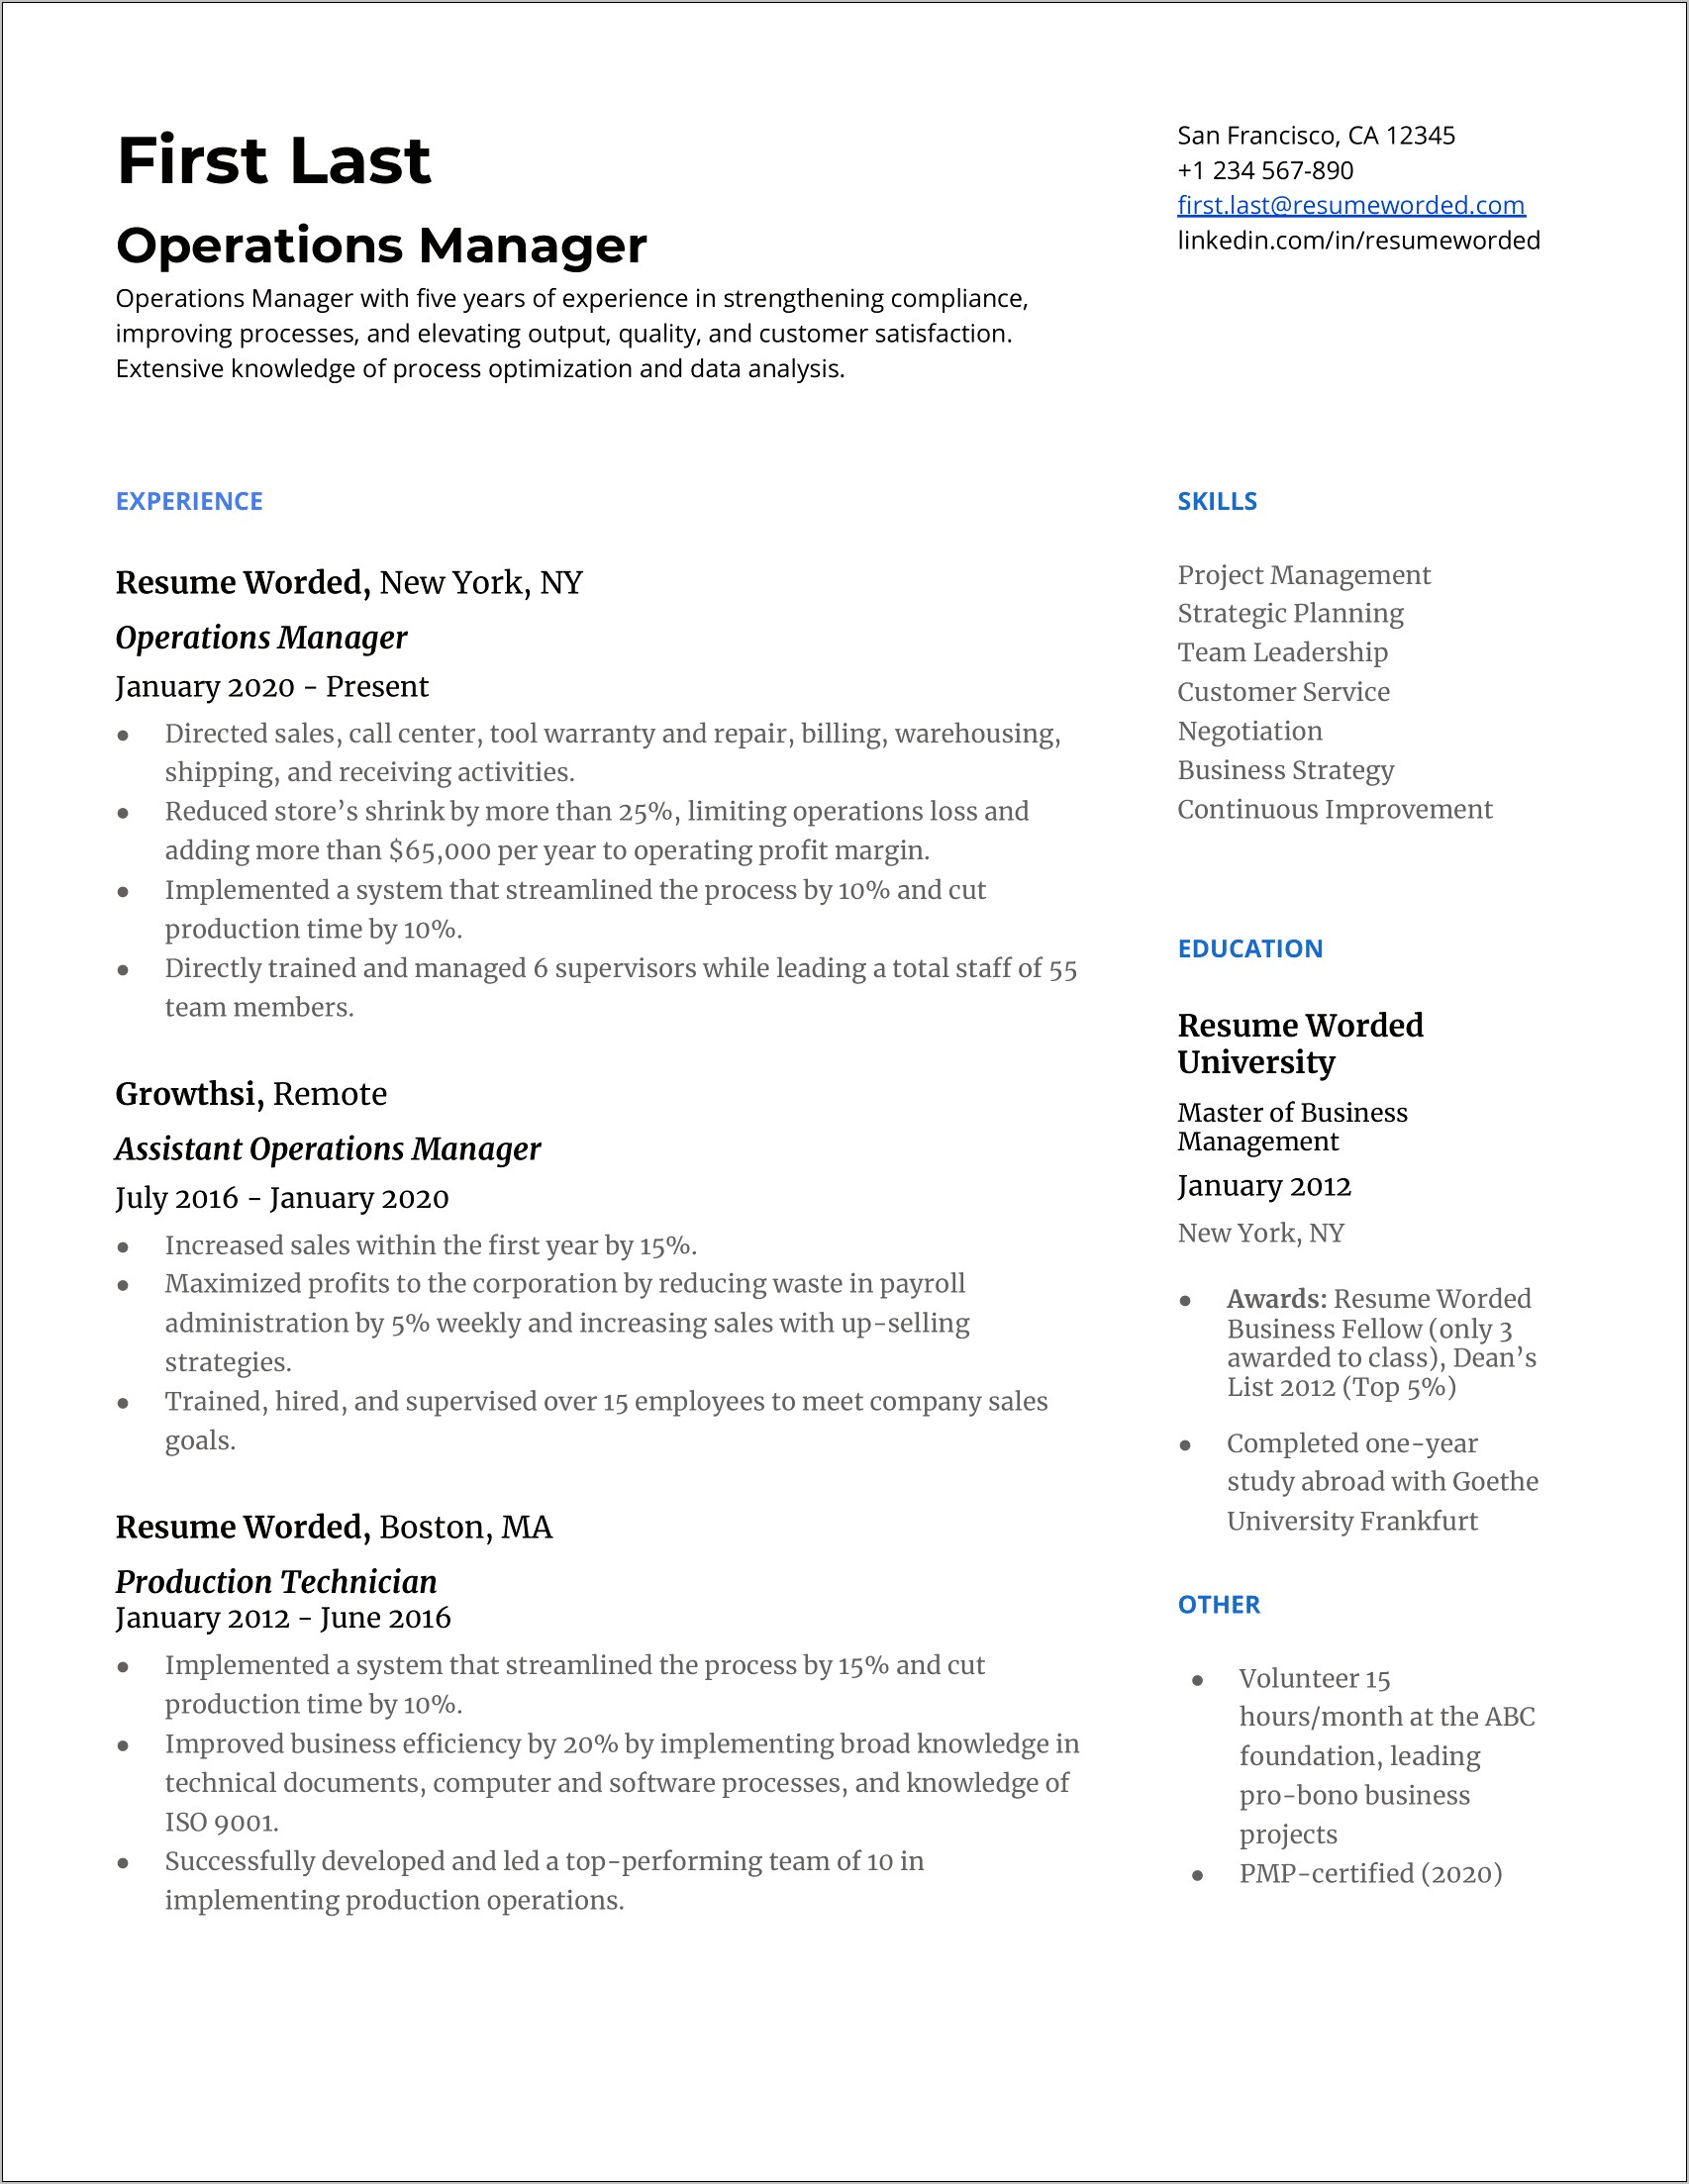 Resume Summary About Managing People